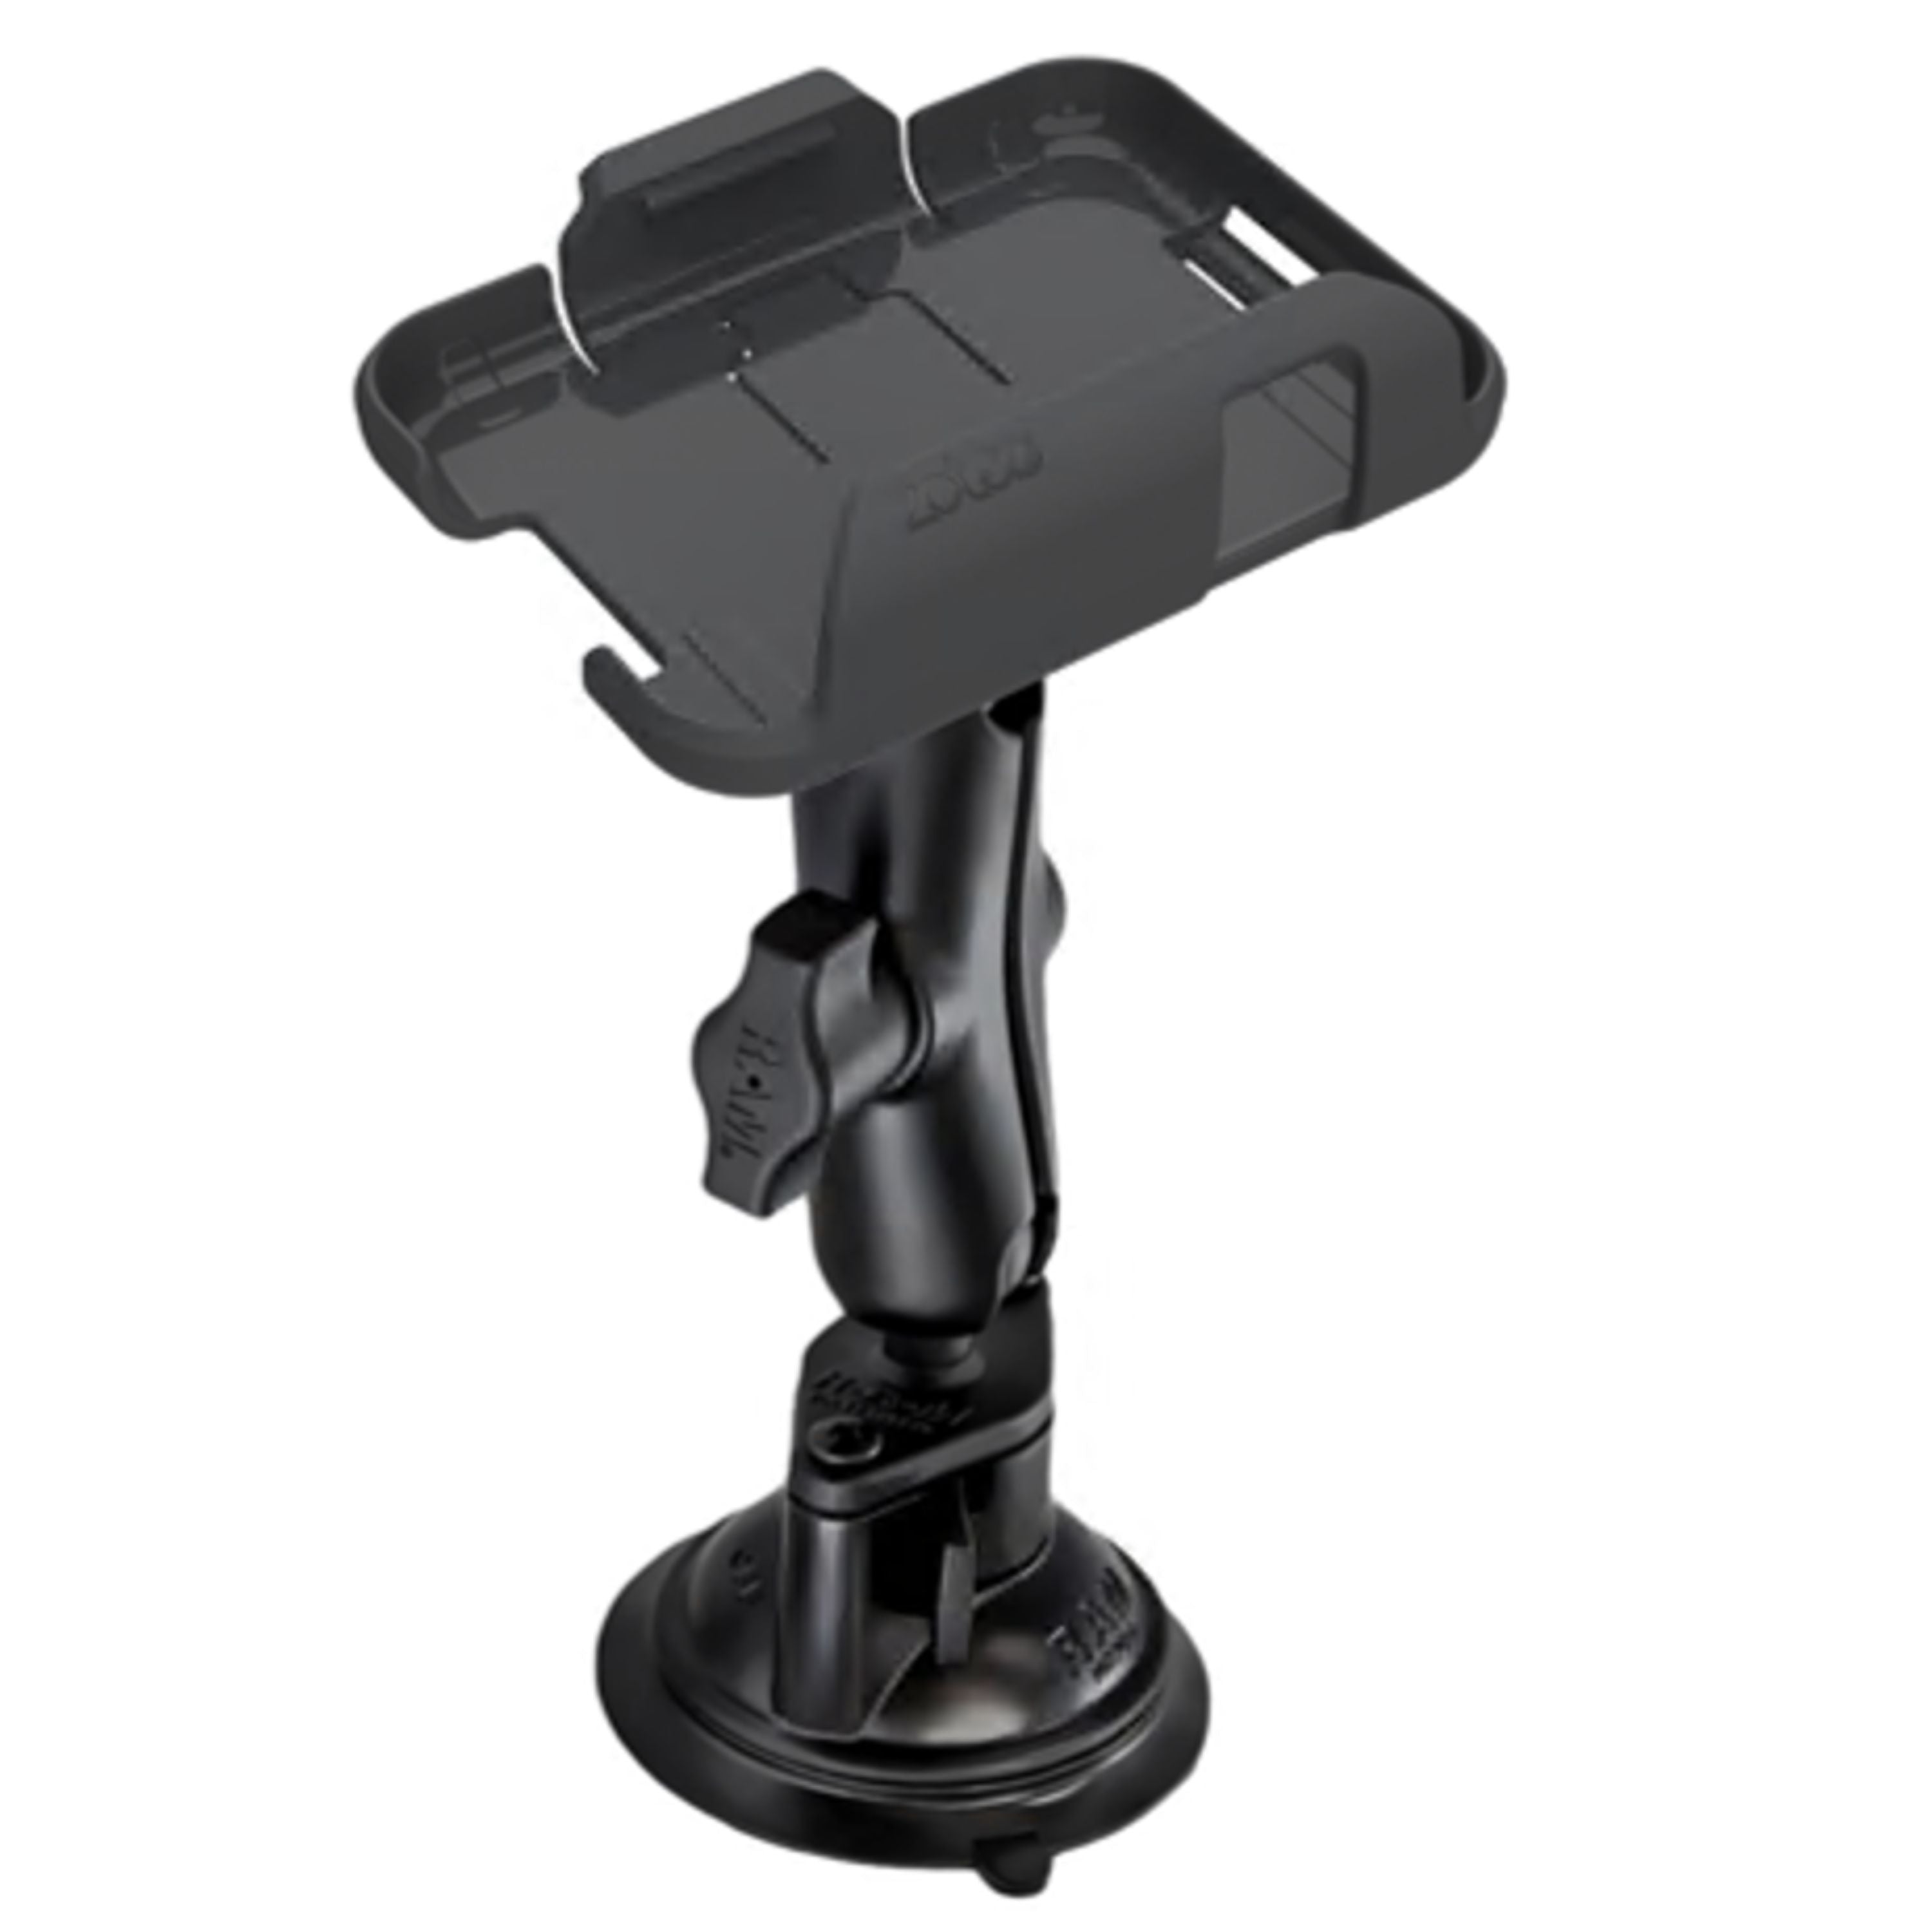 Zoleo universal mount with suction cup